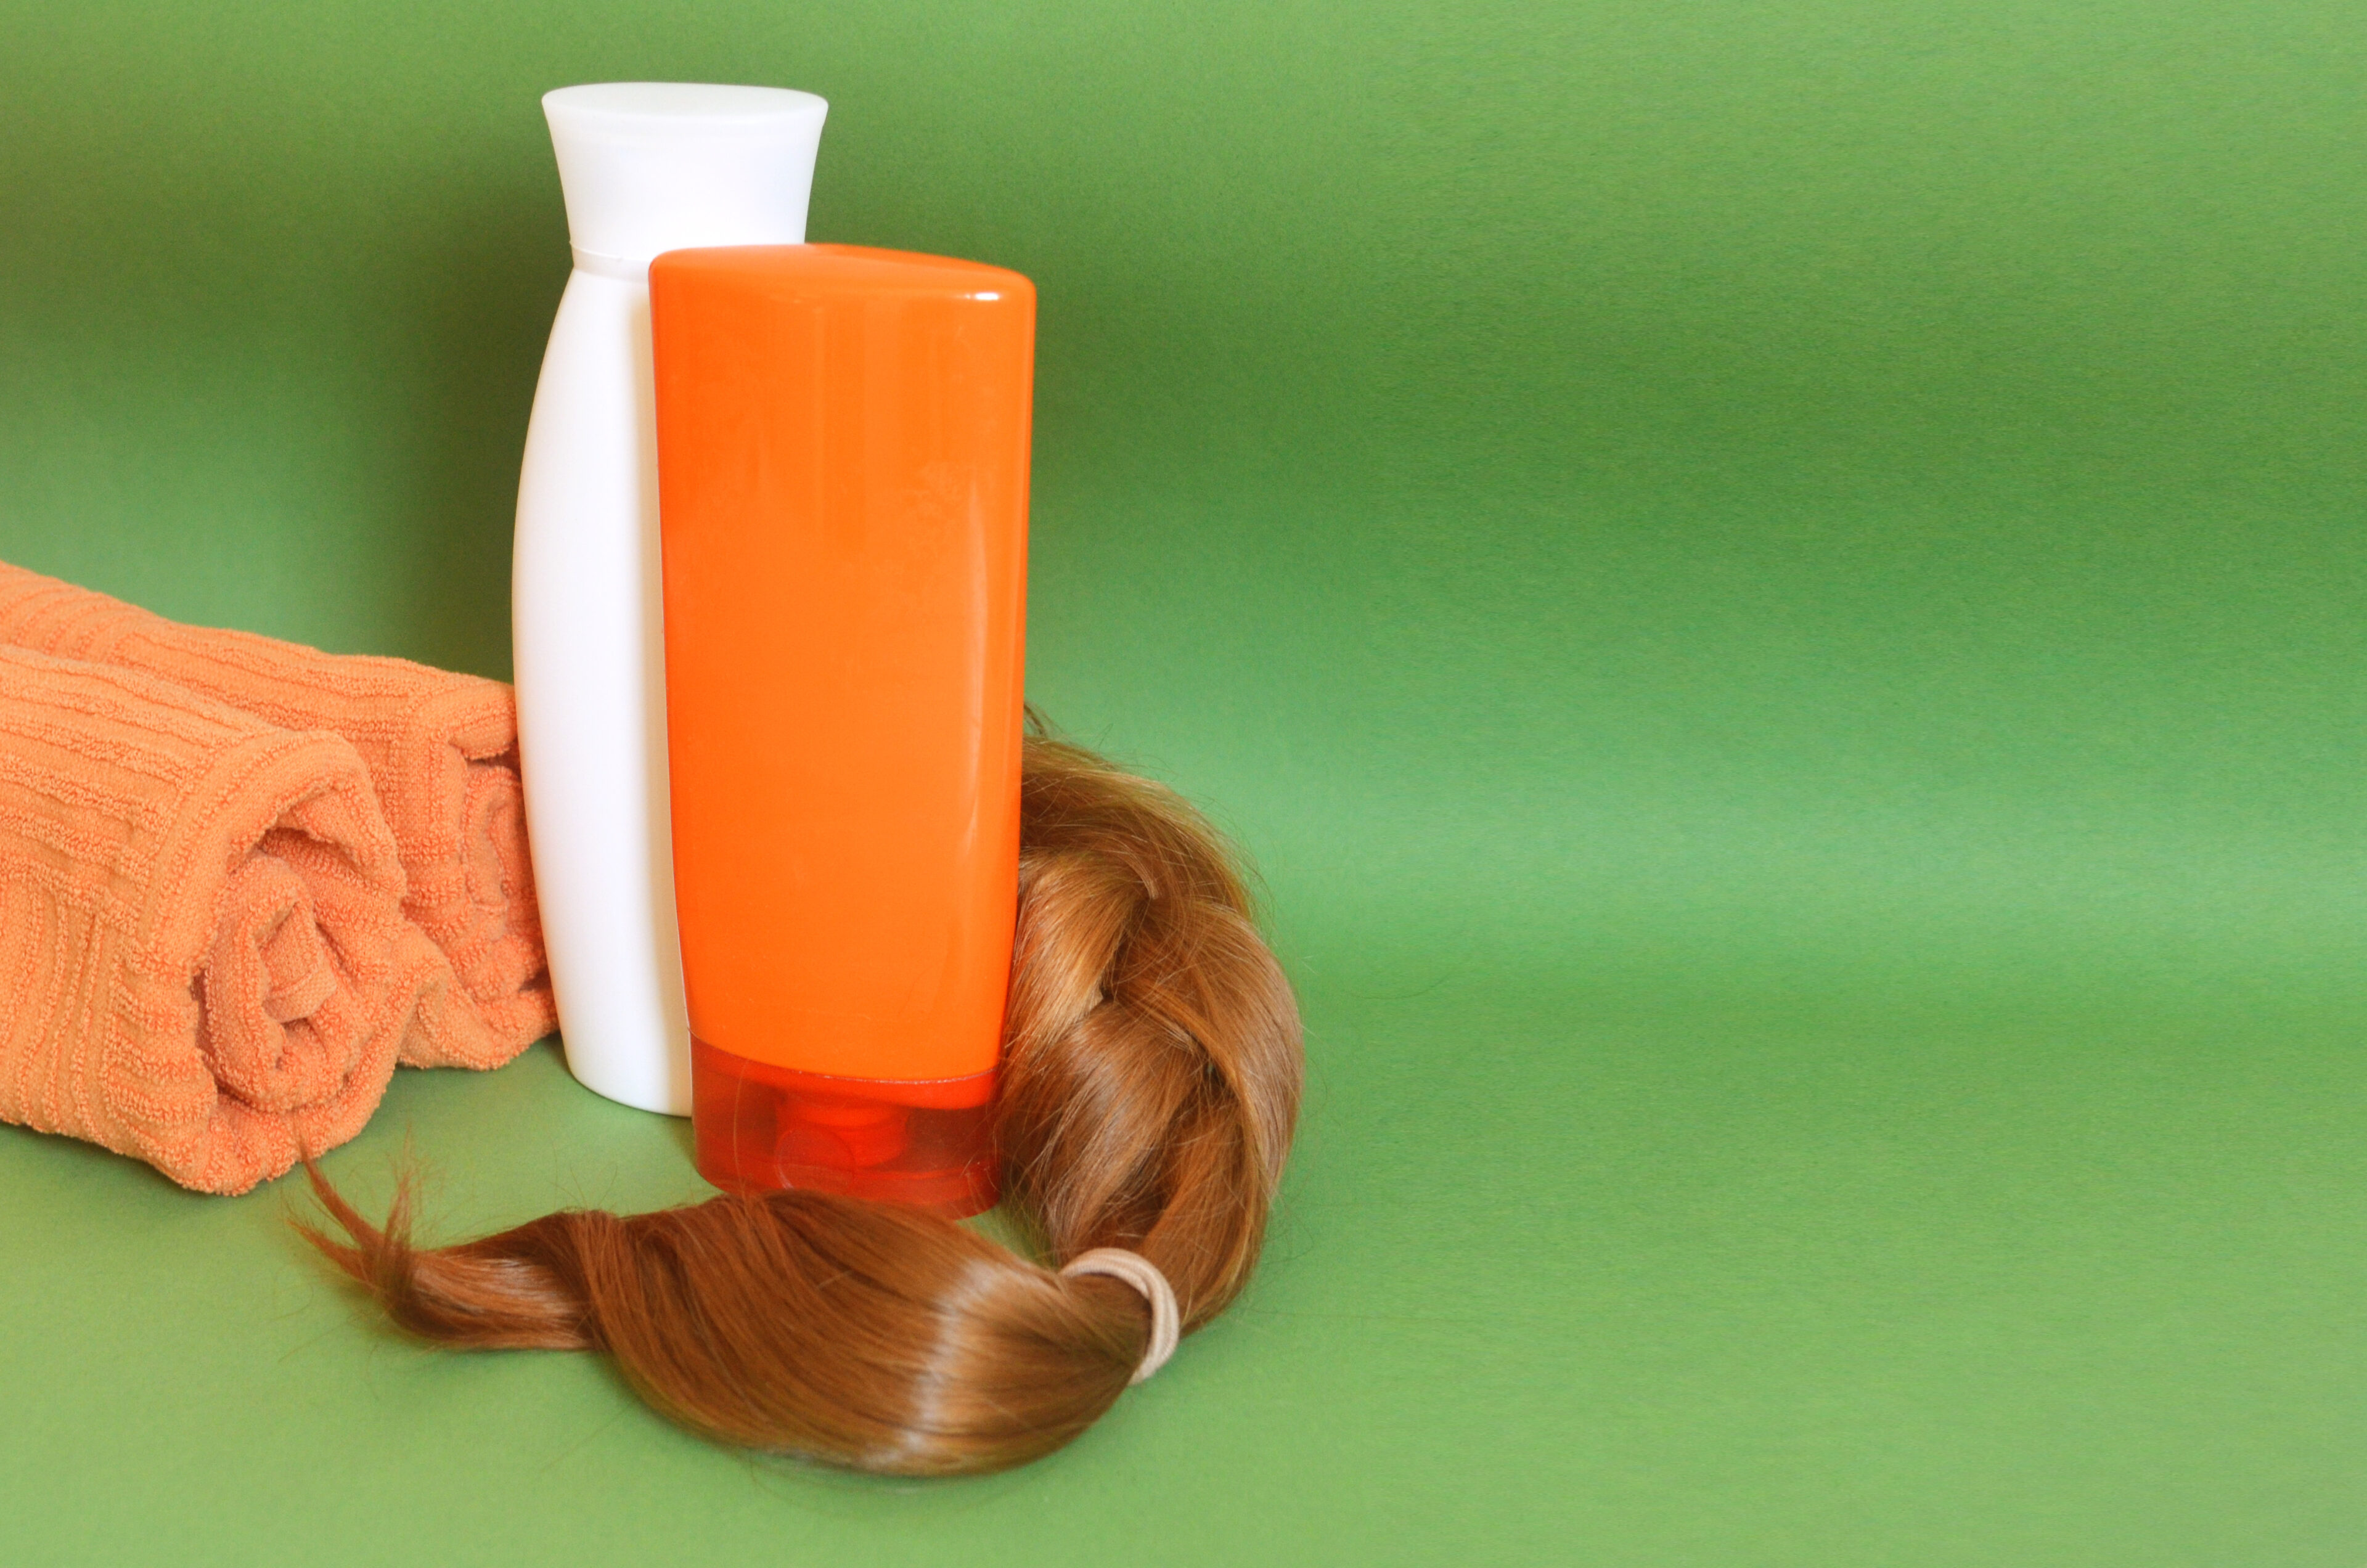 Clarifying shampoo: The first line of defense